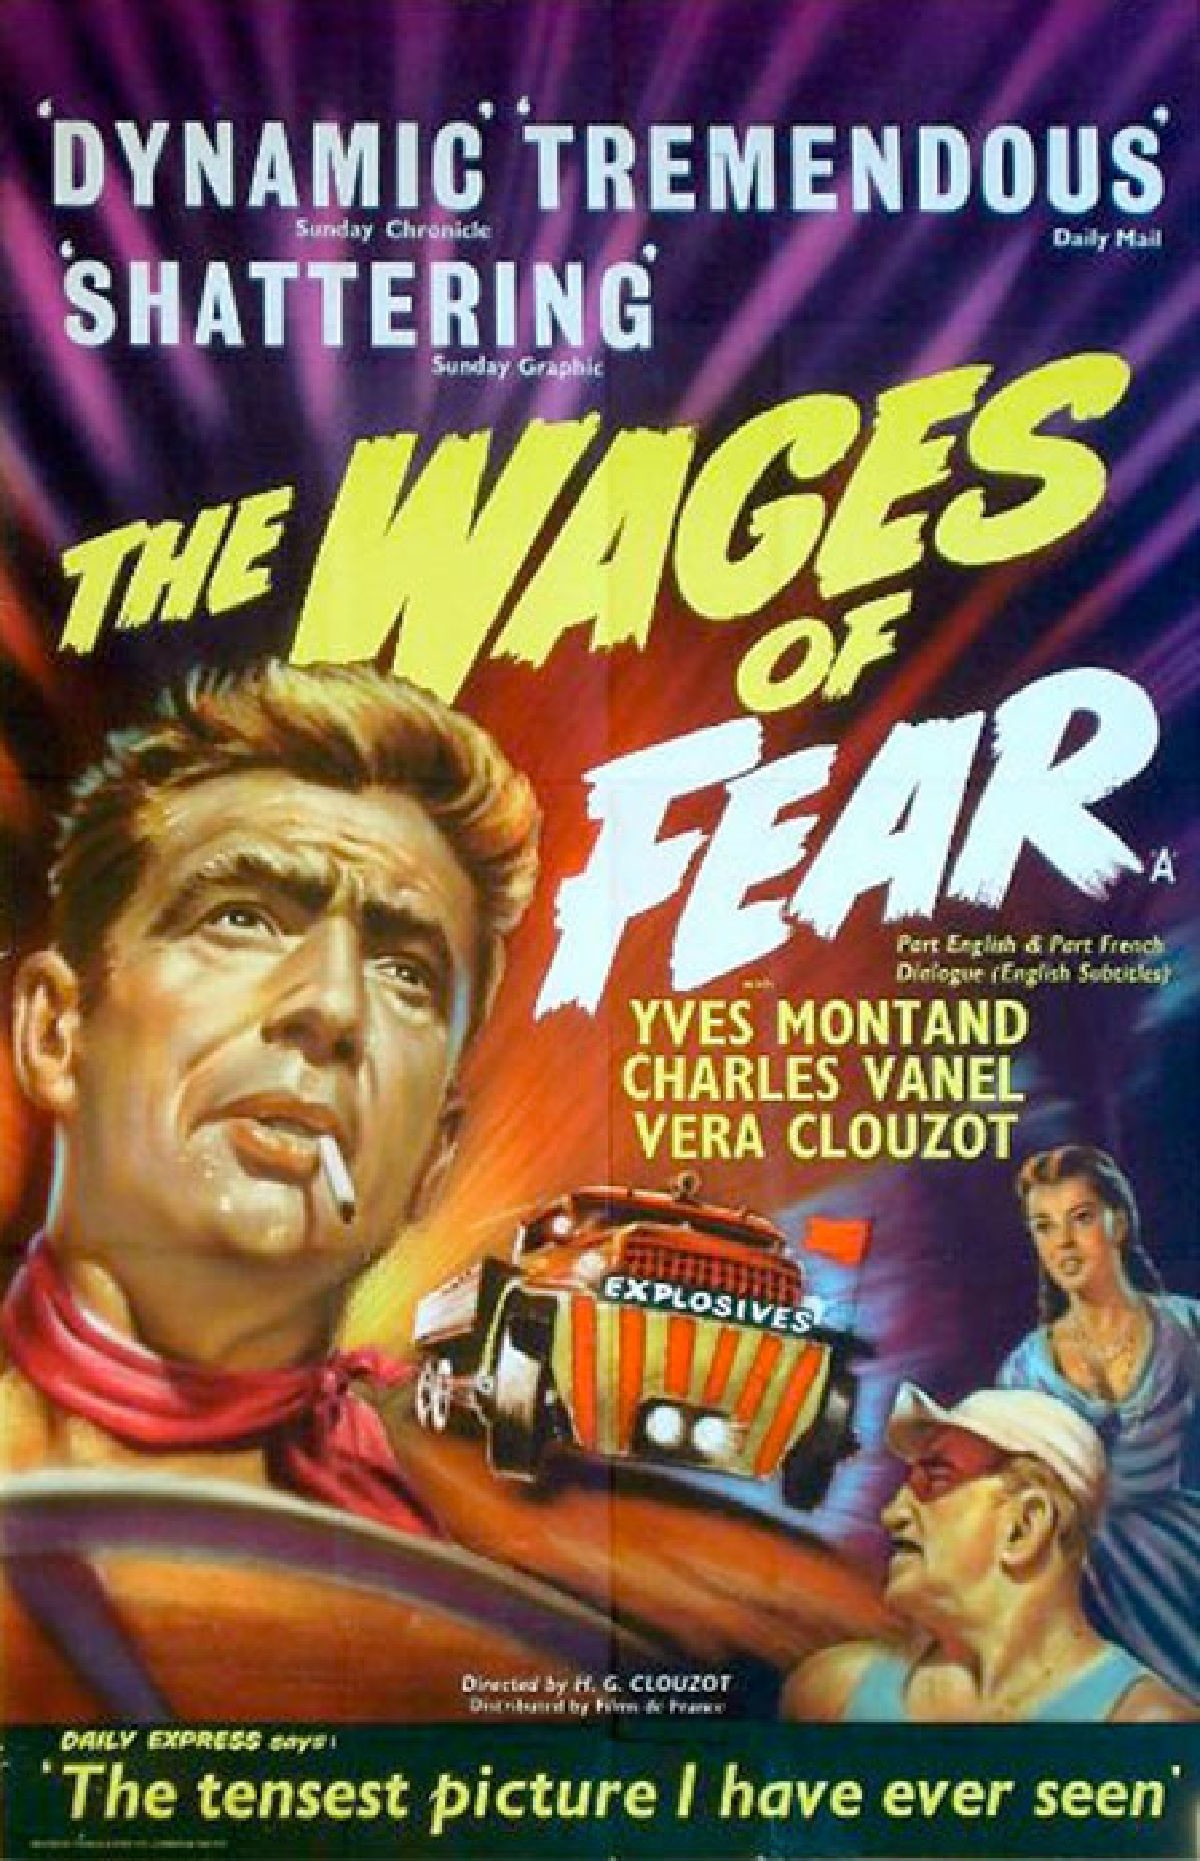 THE WAGES OF FEAR